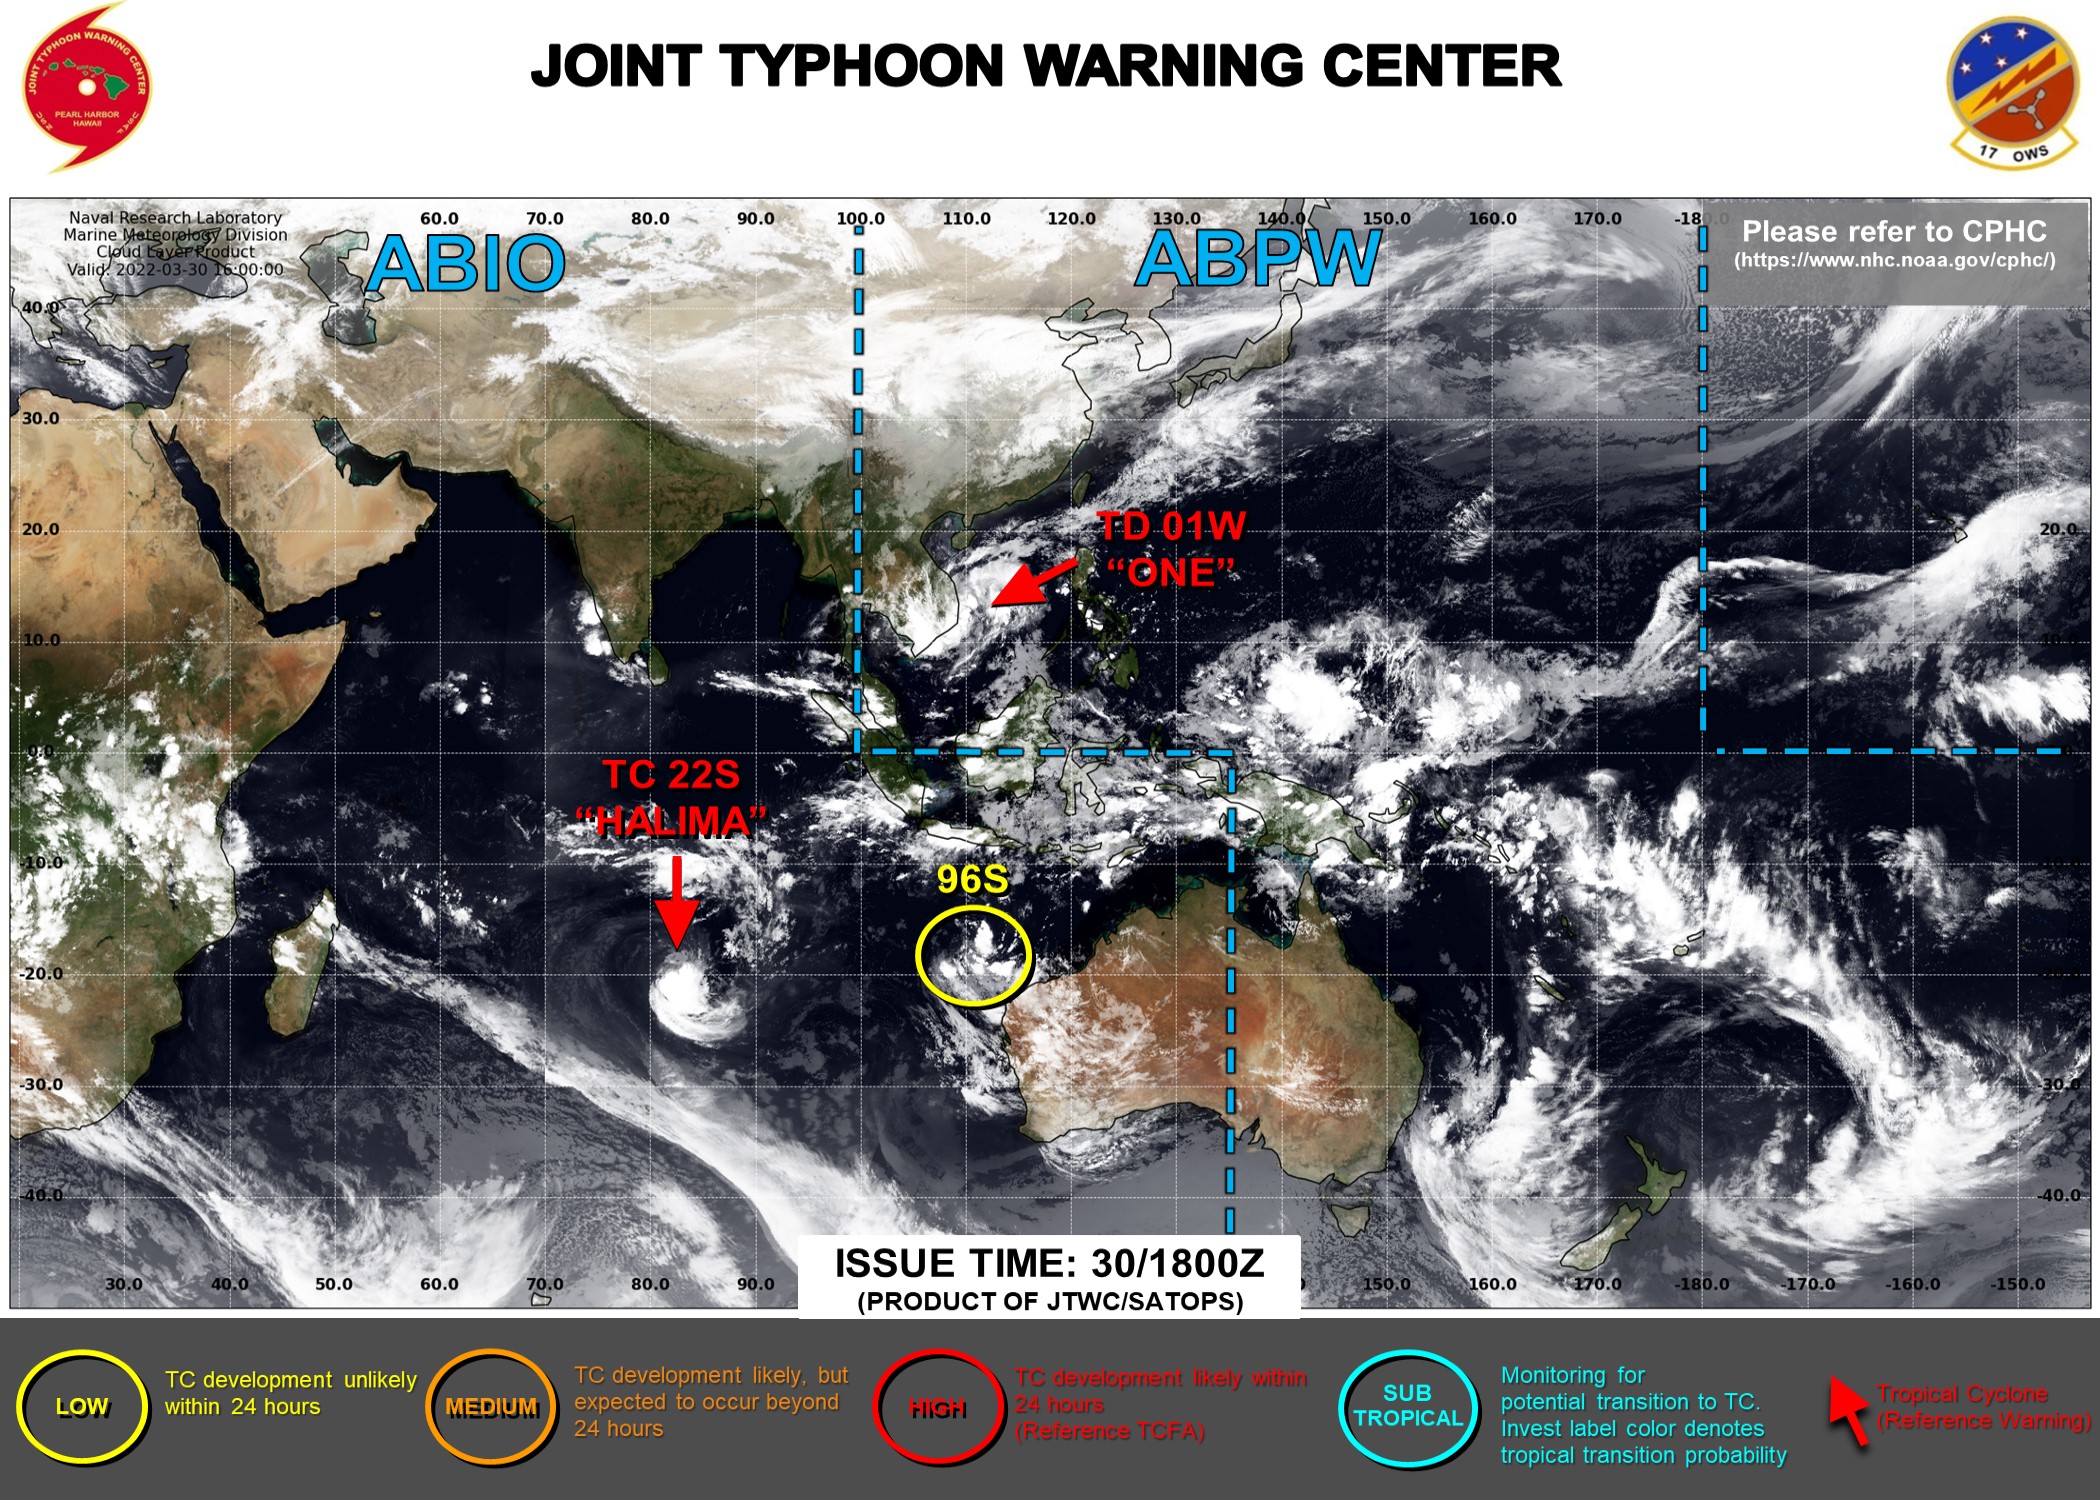 JTWC IS ISSUING 12HOURLY WARNINGS ON TC 22S(HALIMA). 3HOURLY SATELLITE BULLETINS ARE ISSUED ON TC 22S AND TD 01W.